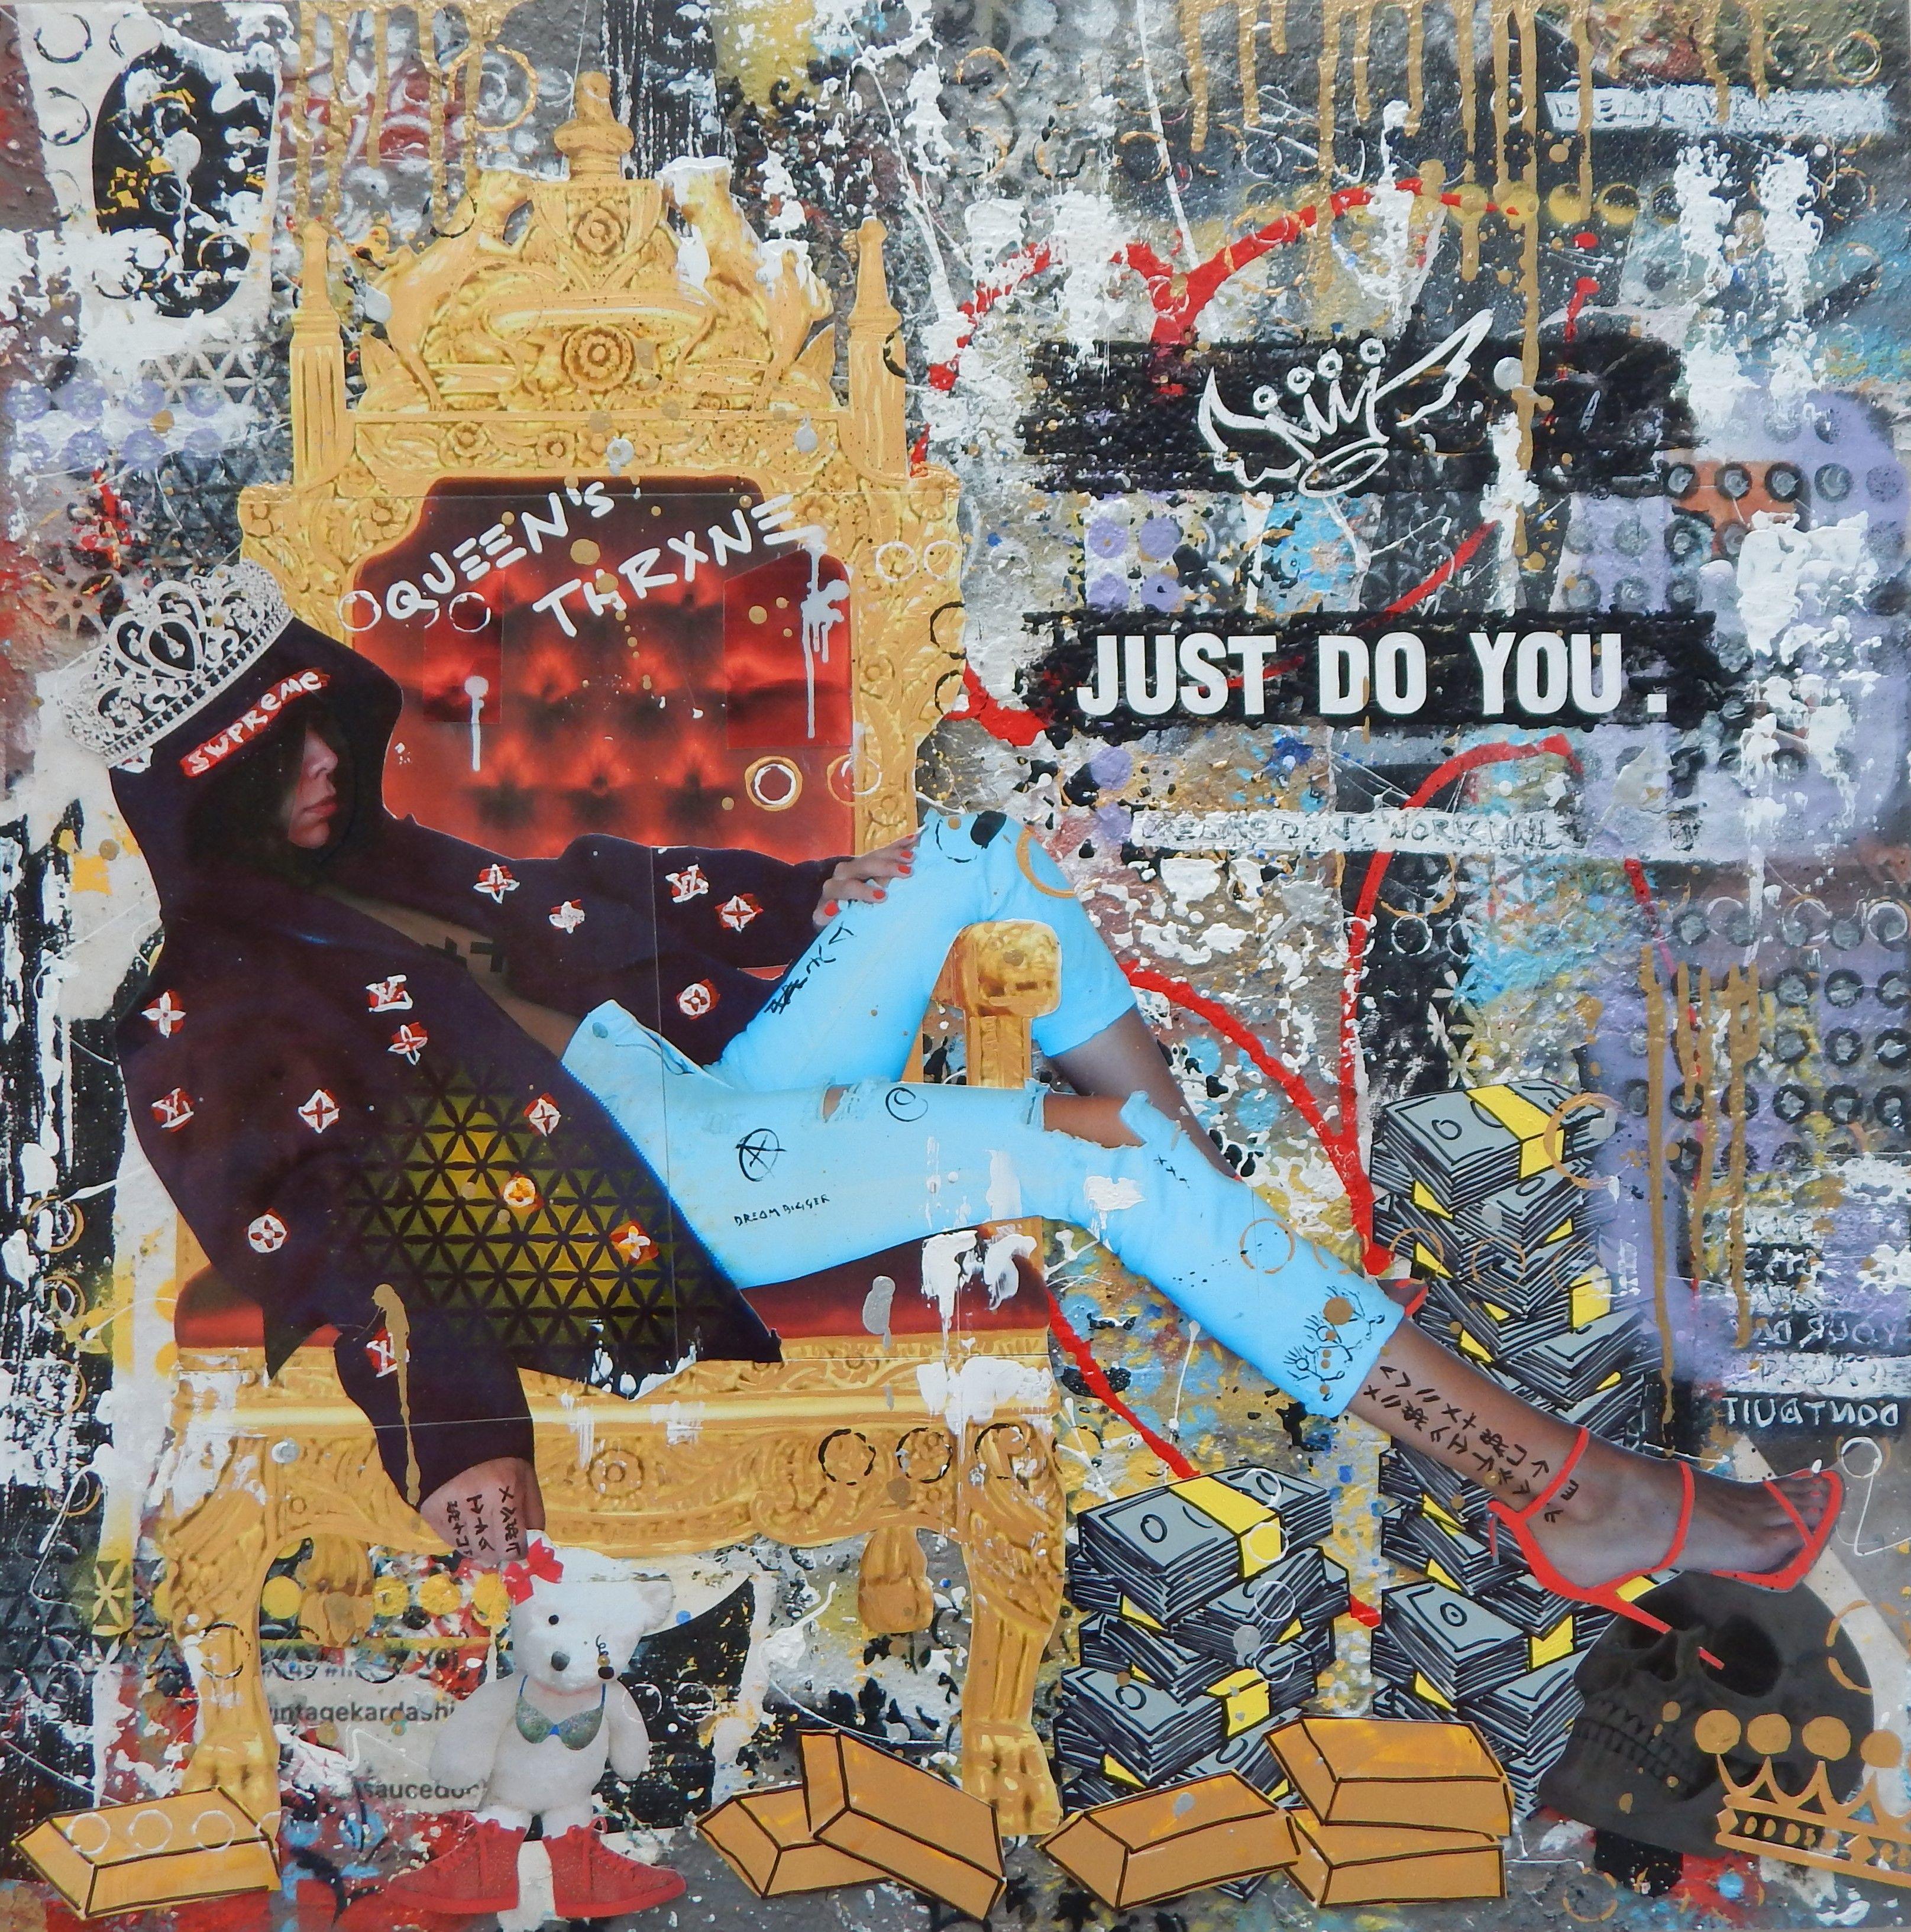 The Queen B, Mixed Media on Wood Panel - Mixed Media Art by Greg Beebe